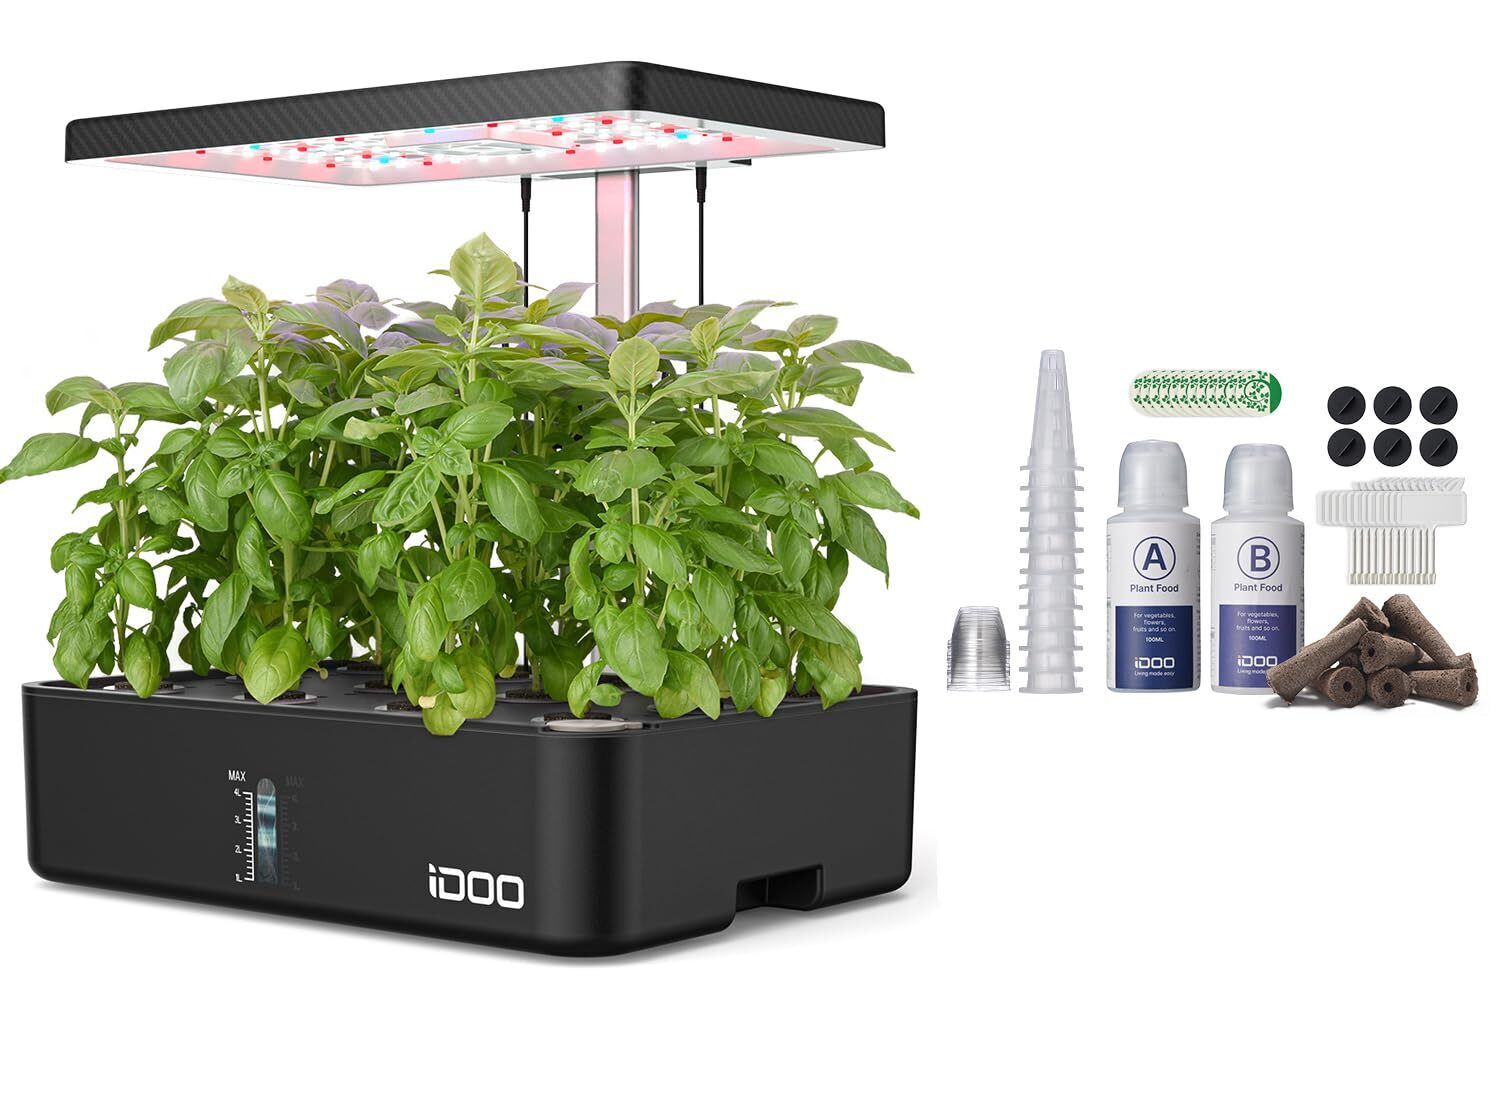 iDOO Hydroponics Growing System Kit 12Pods, Indoor Garden with LED Grow Light...